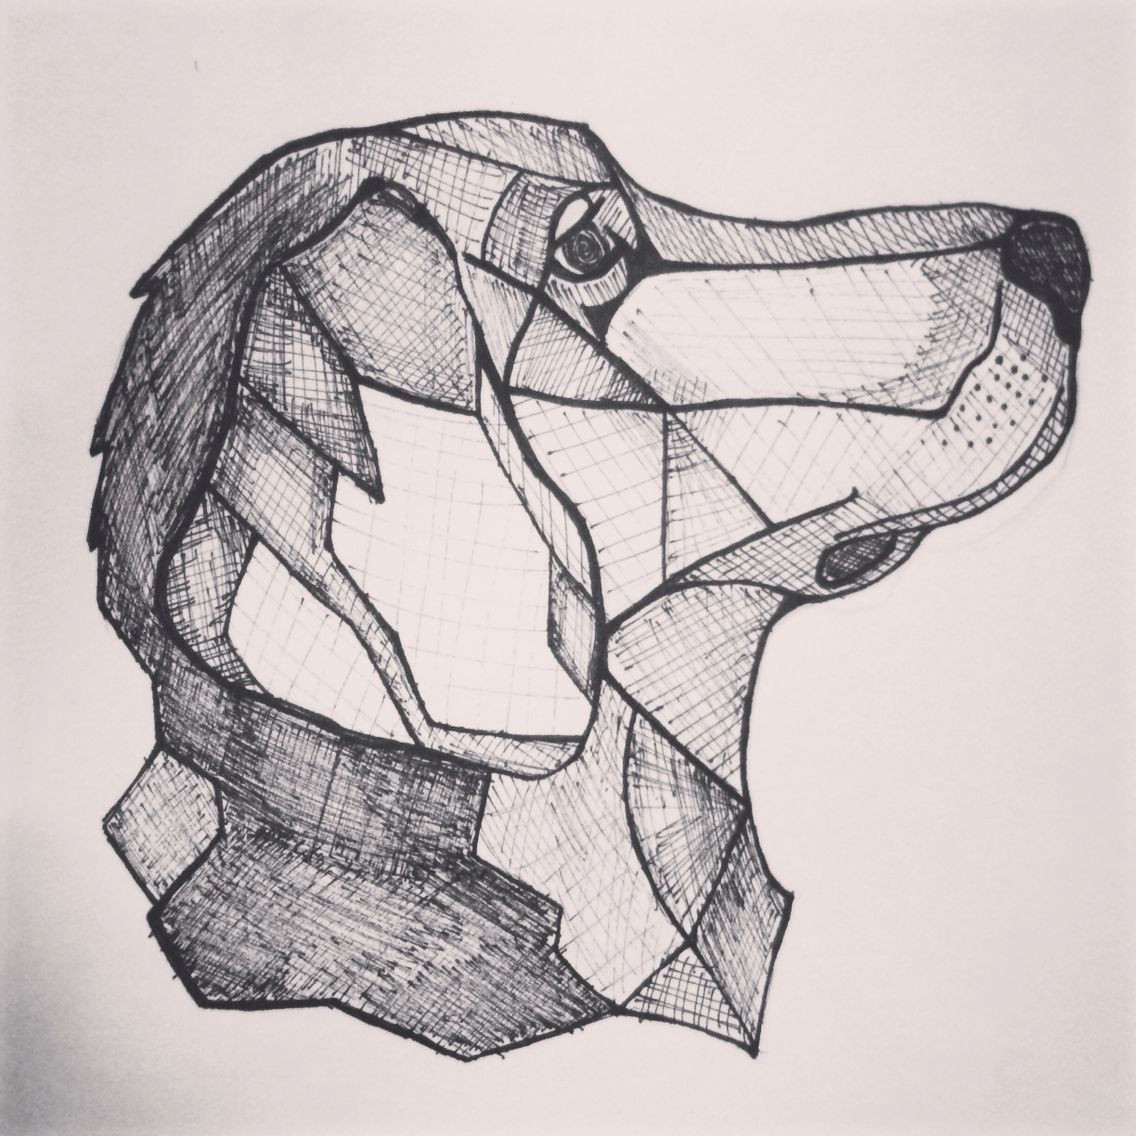 inspired by a tattoo i saw i decided to try drawing my golden retriever in a similar style